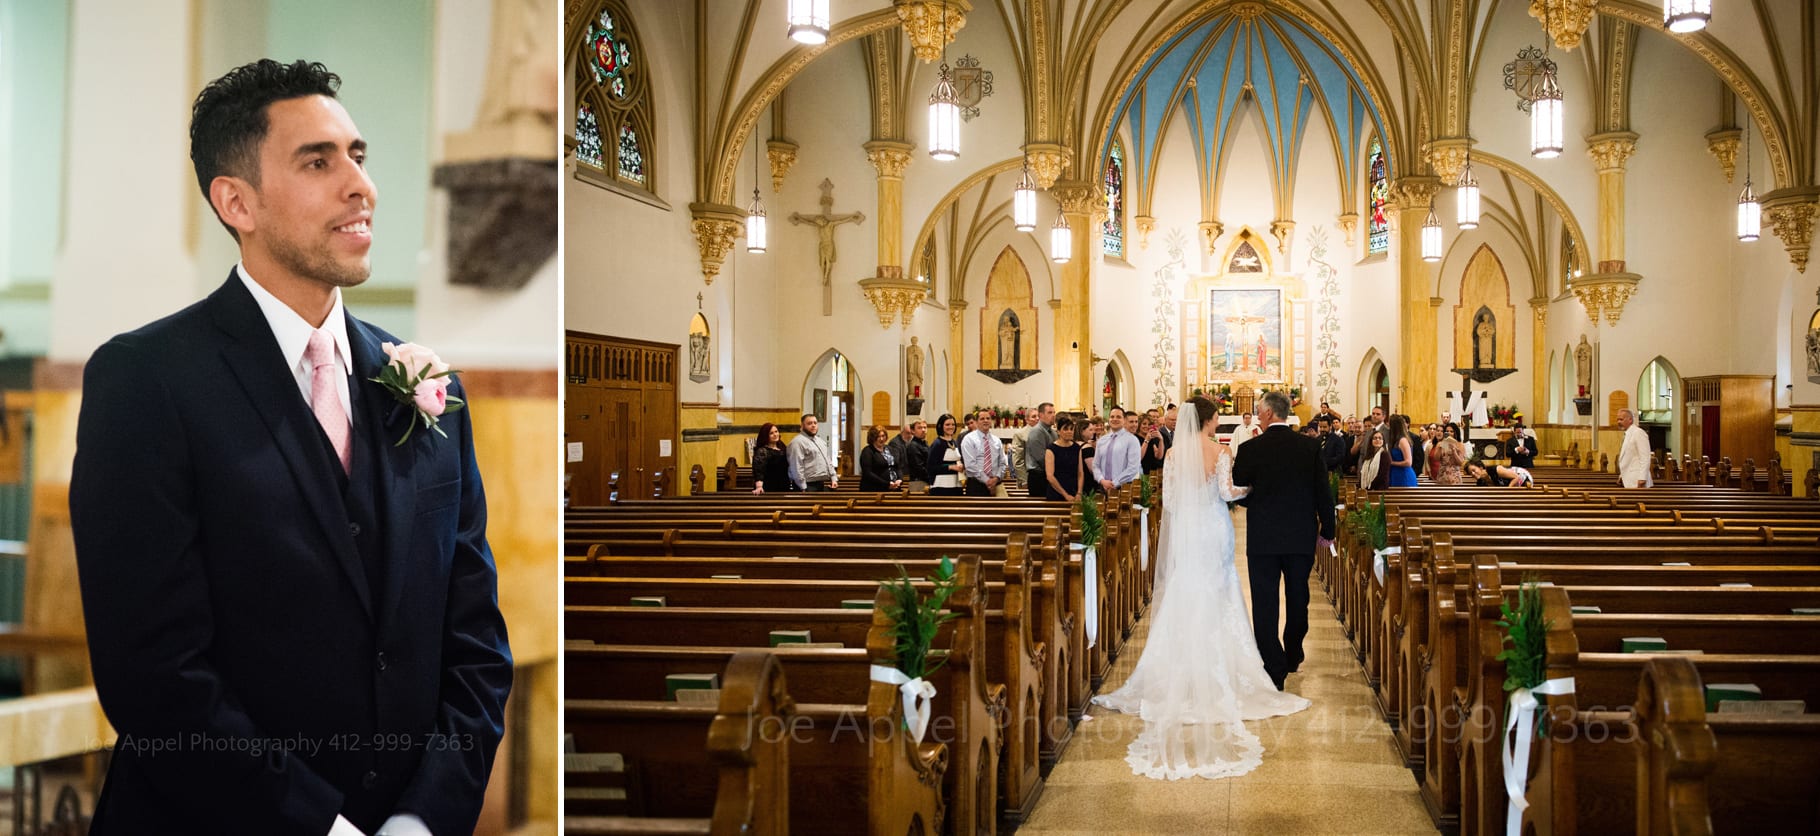 two photos with the first one being a groom watching with a smile as his bride walks down the aisle towards him. The second photo shows the interior of the church from the back as the bride and her father walk down the aisle.